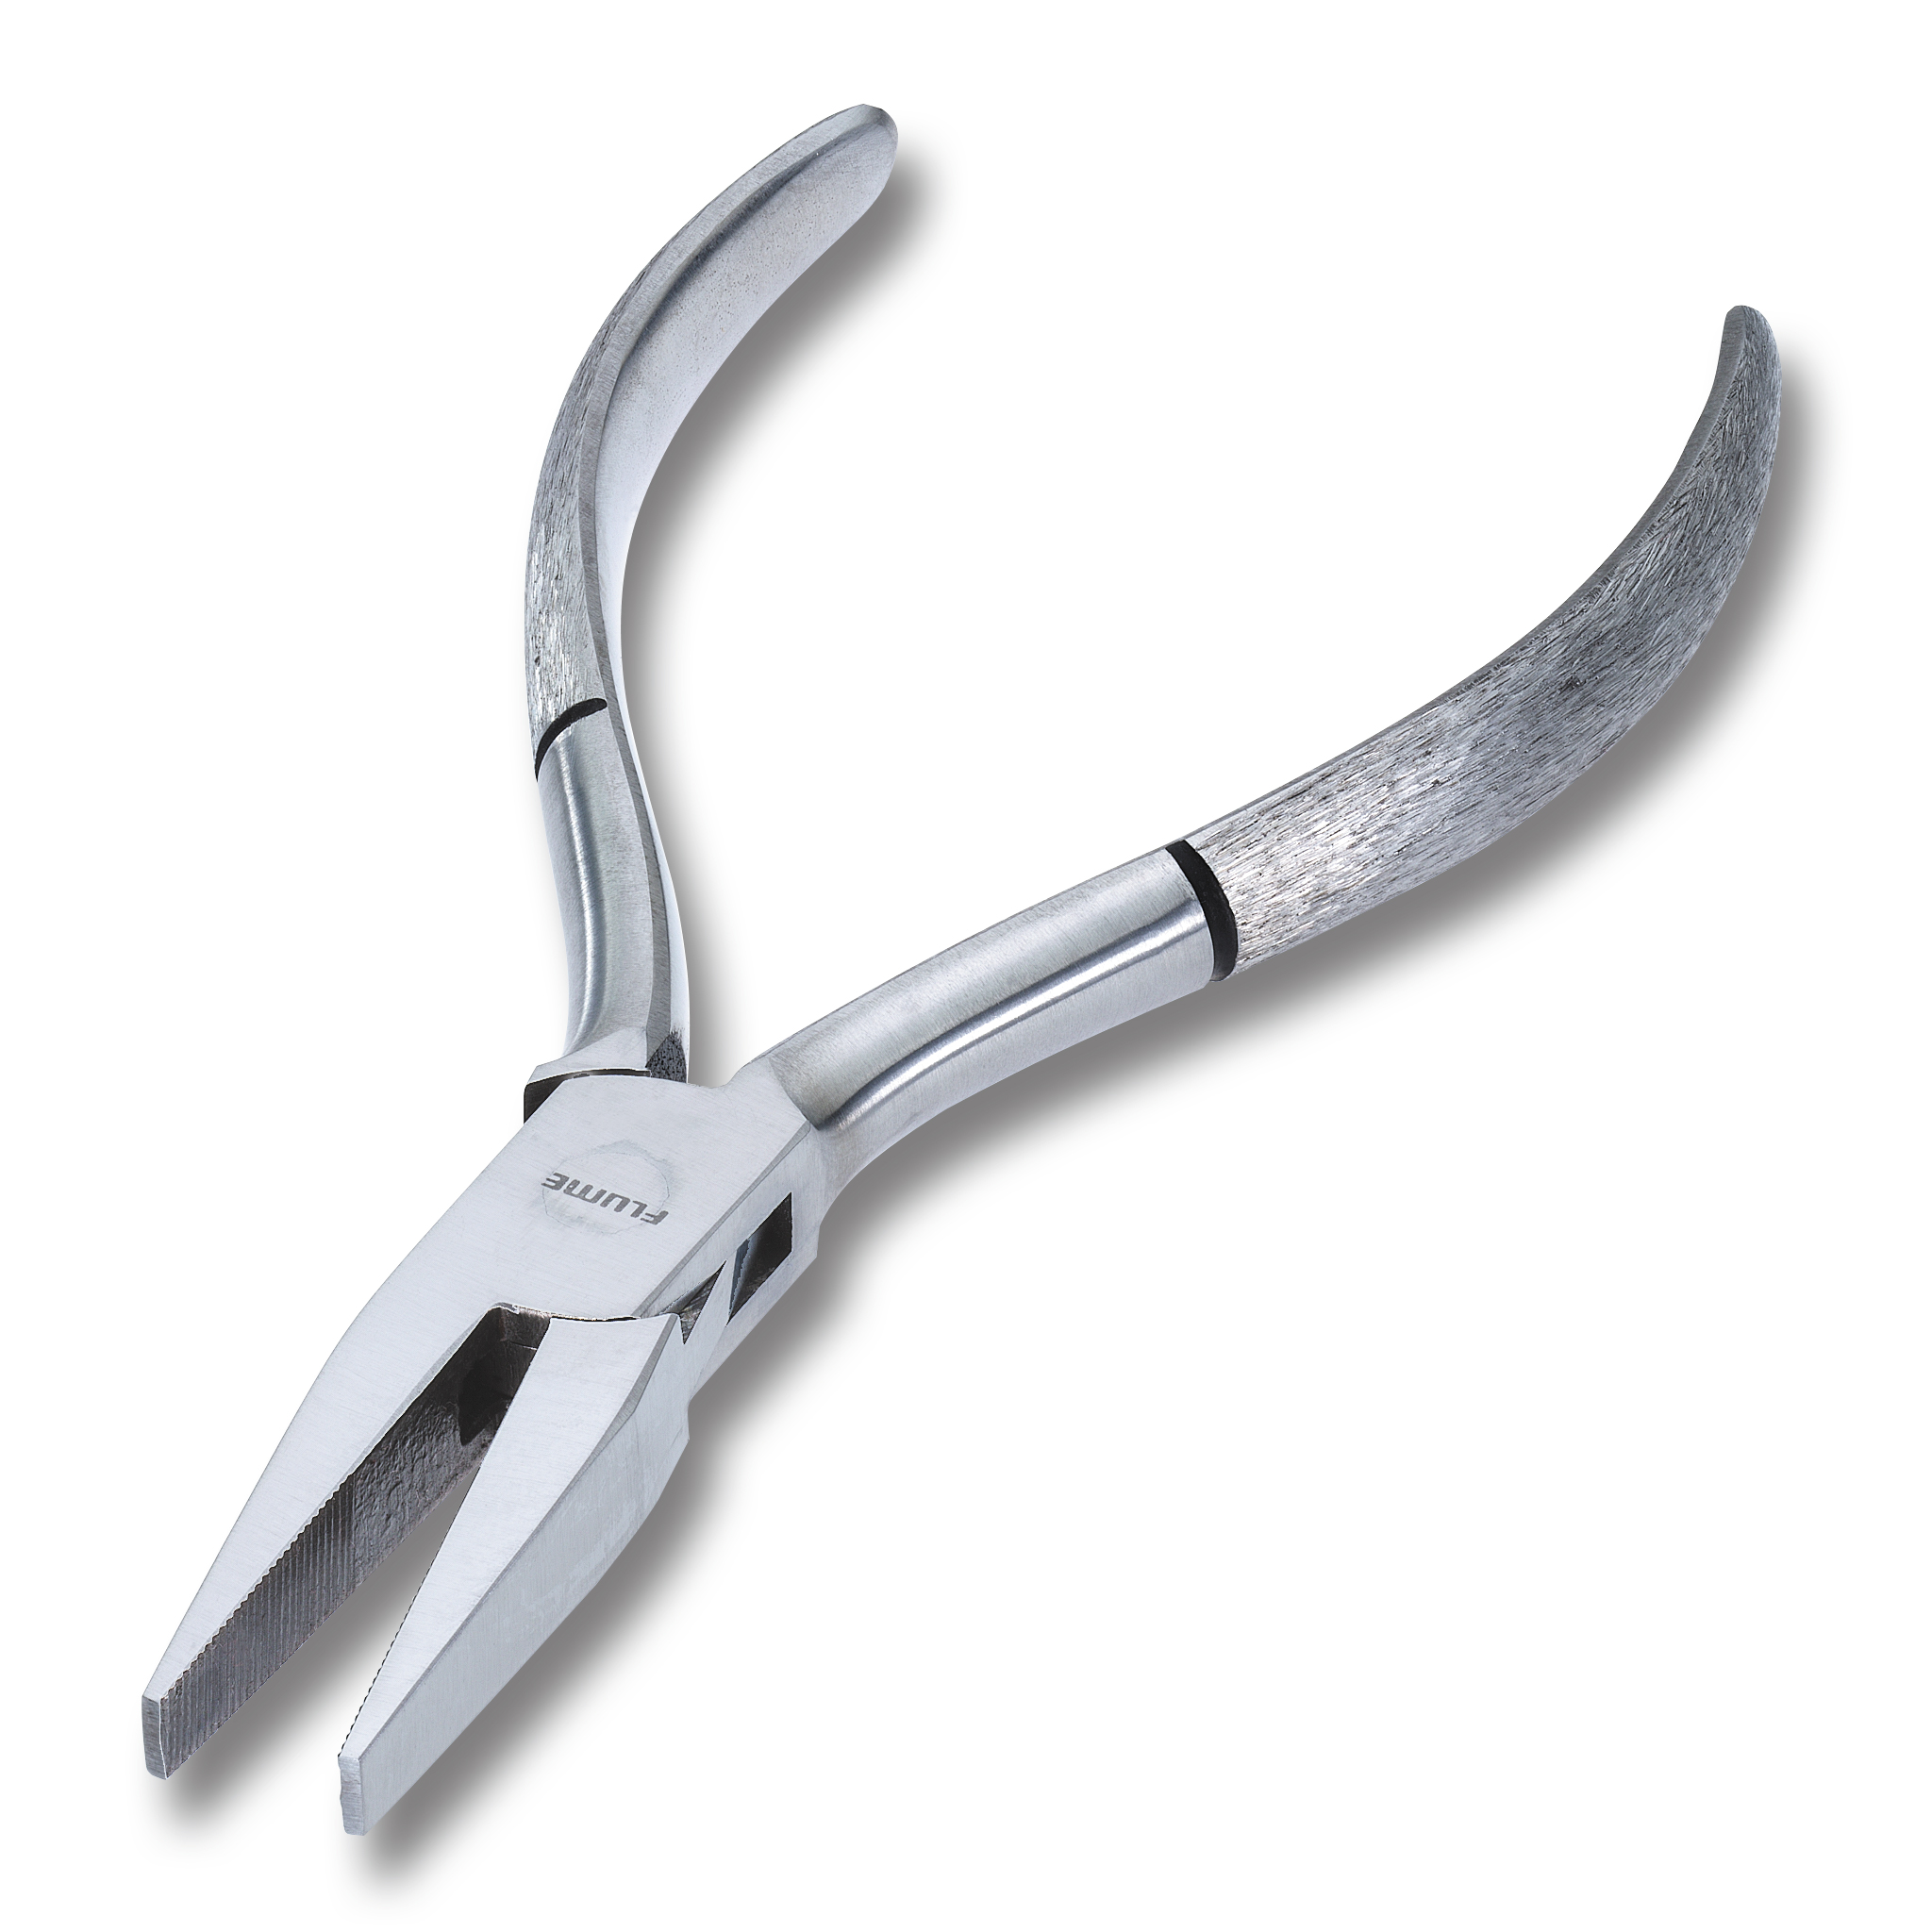 Super-Gripp flat-nosed pliers, width 5 mm with box joint.